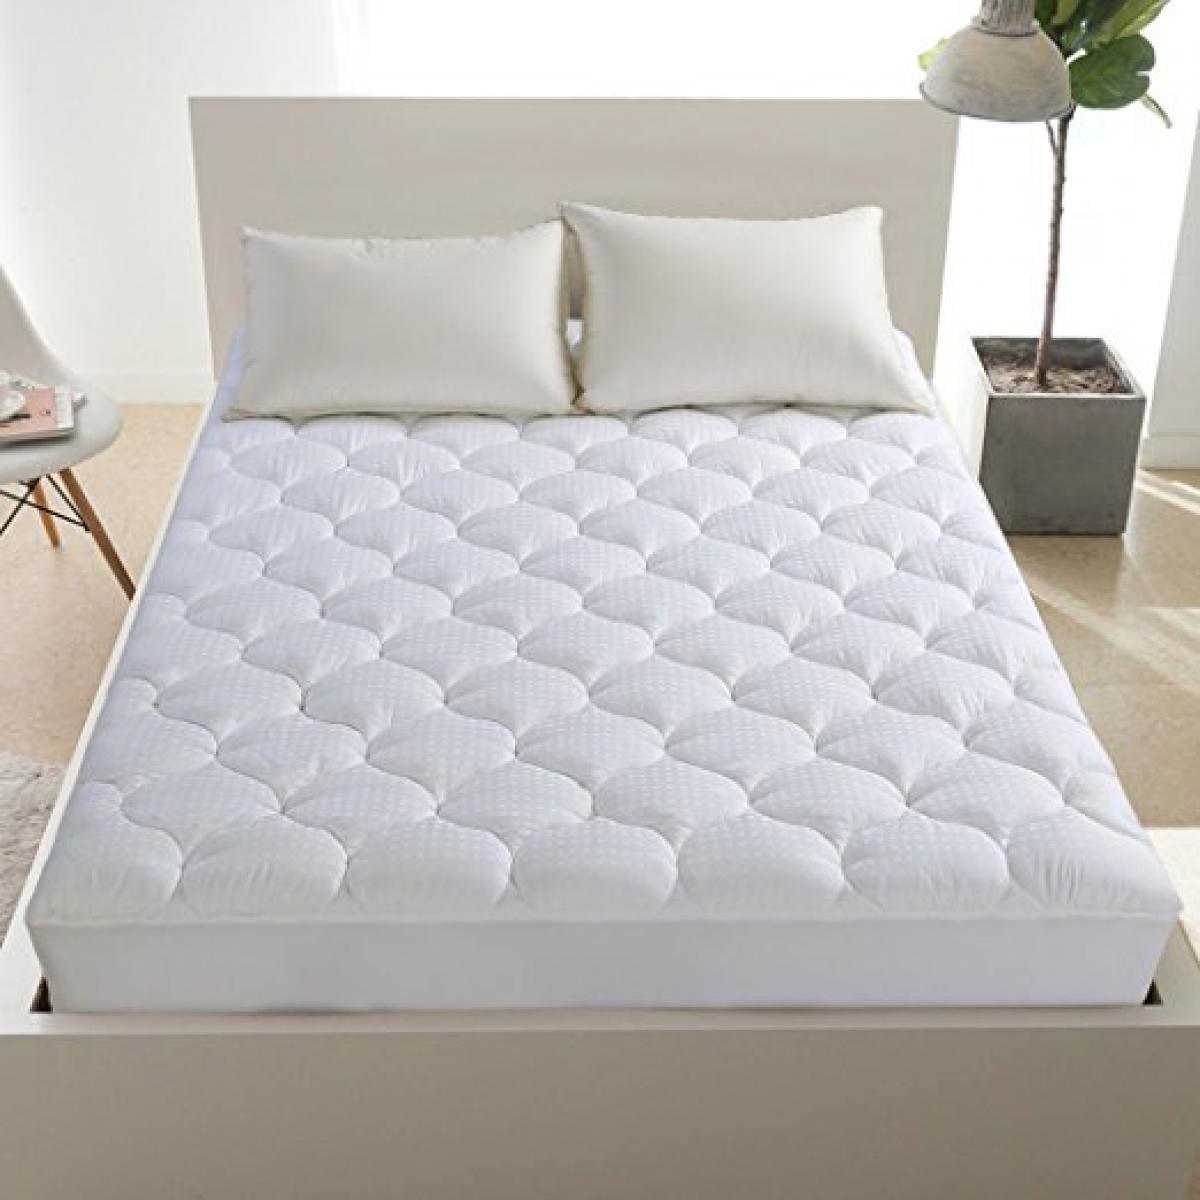 Overfilled Fitted Mattress Pad Cover